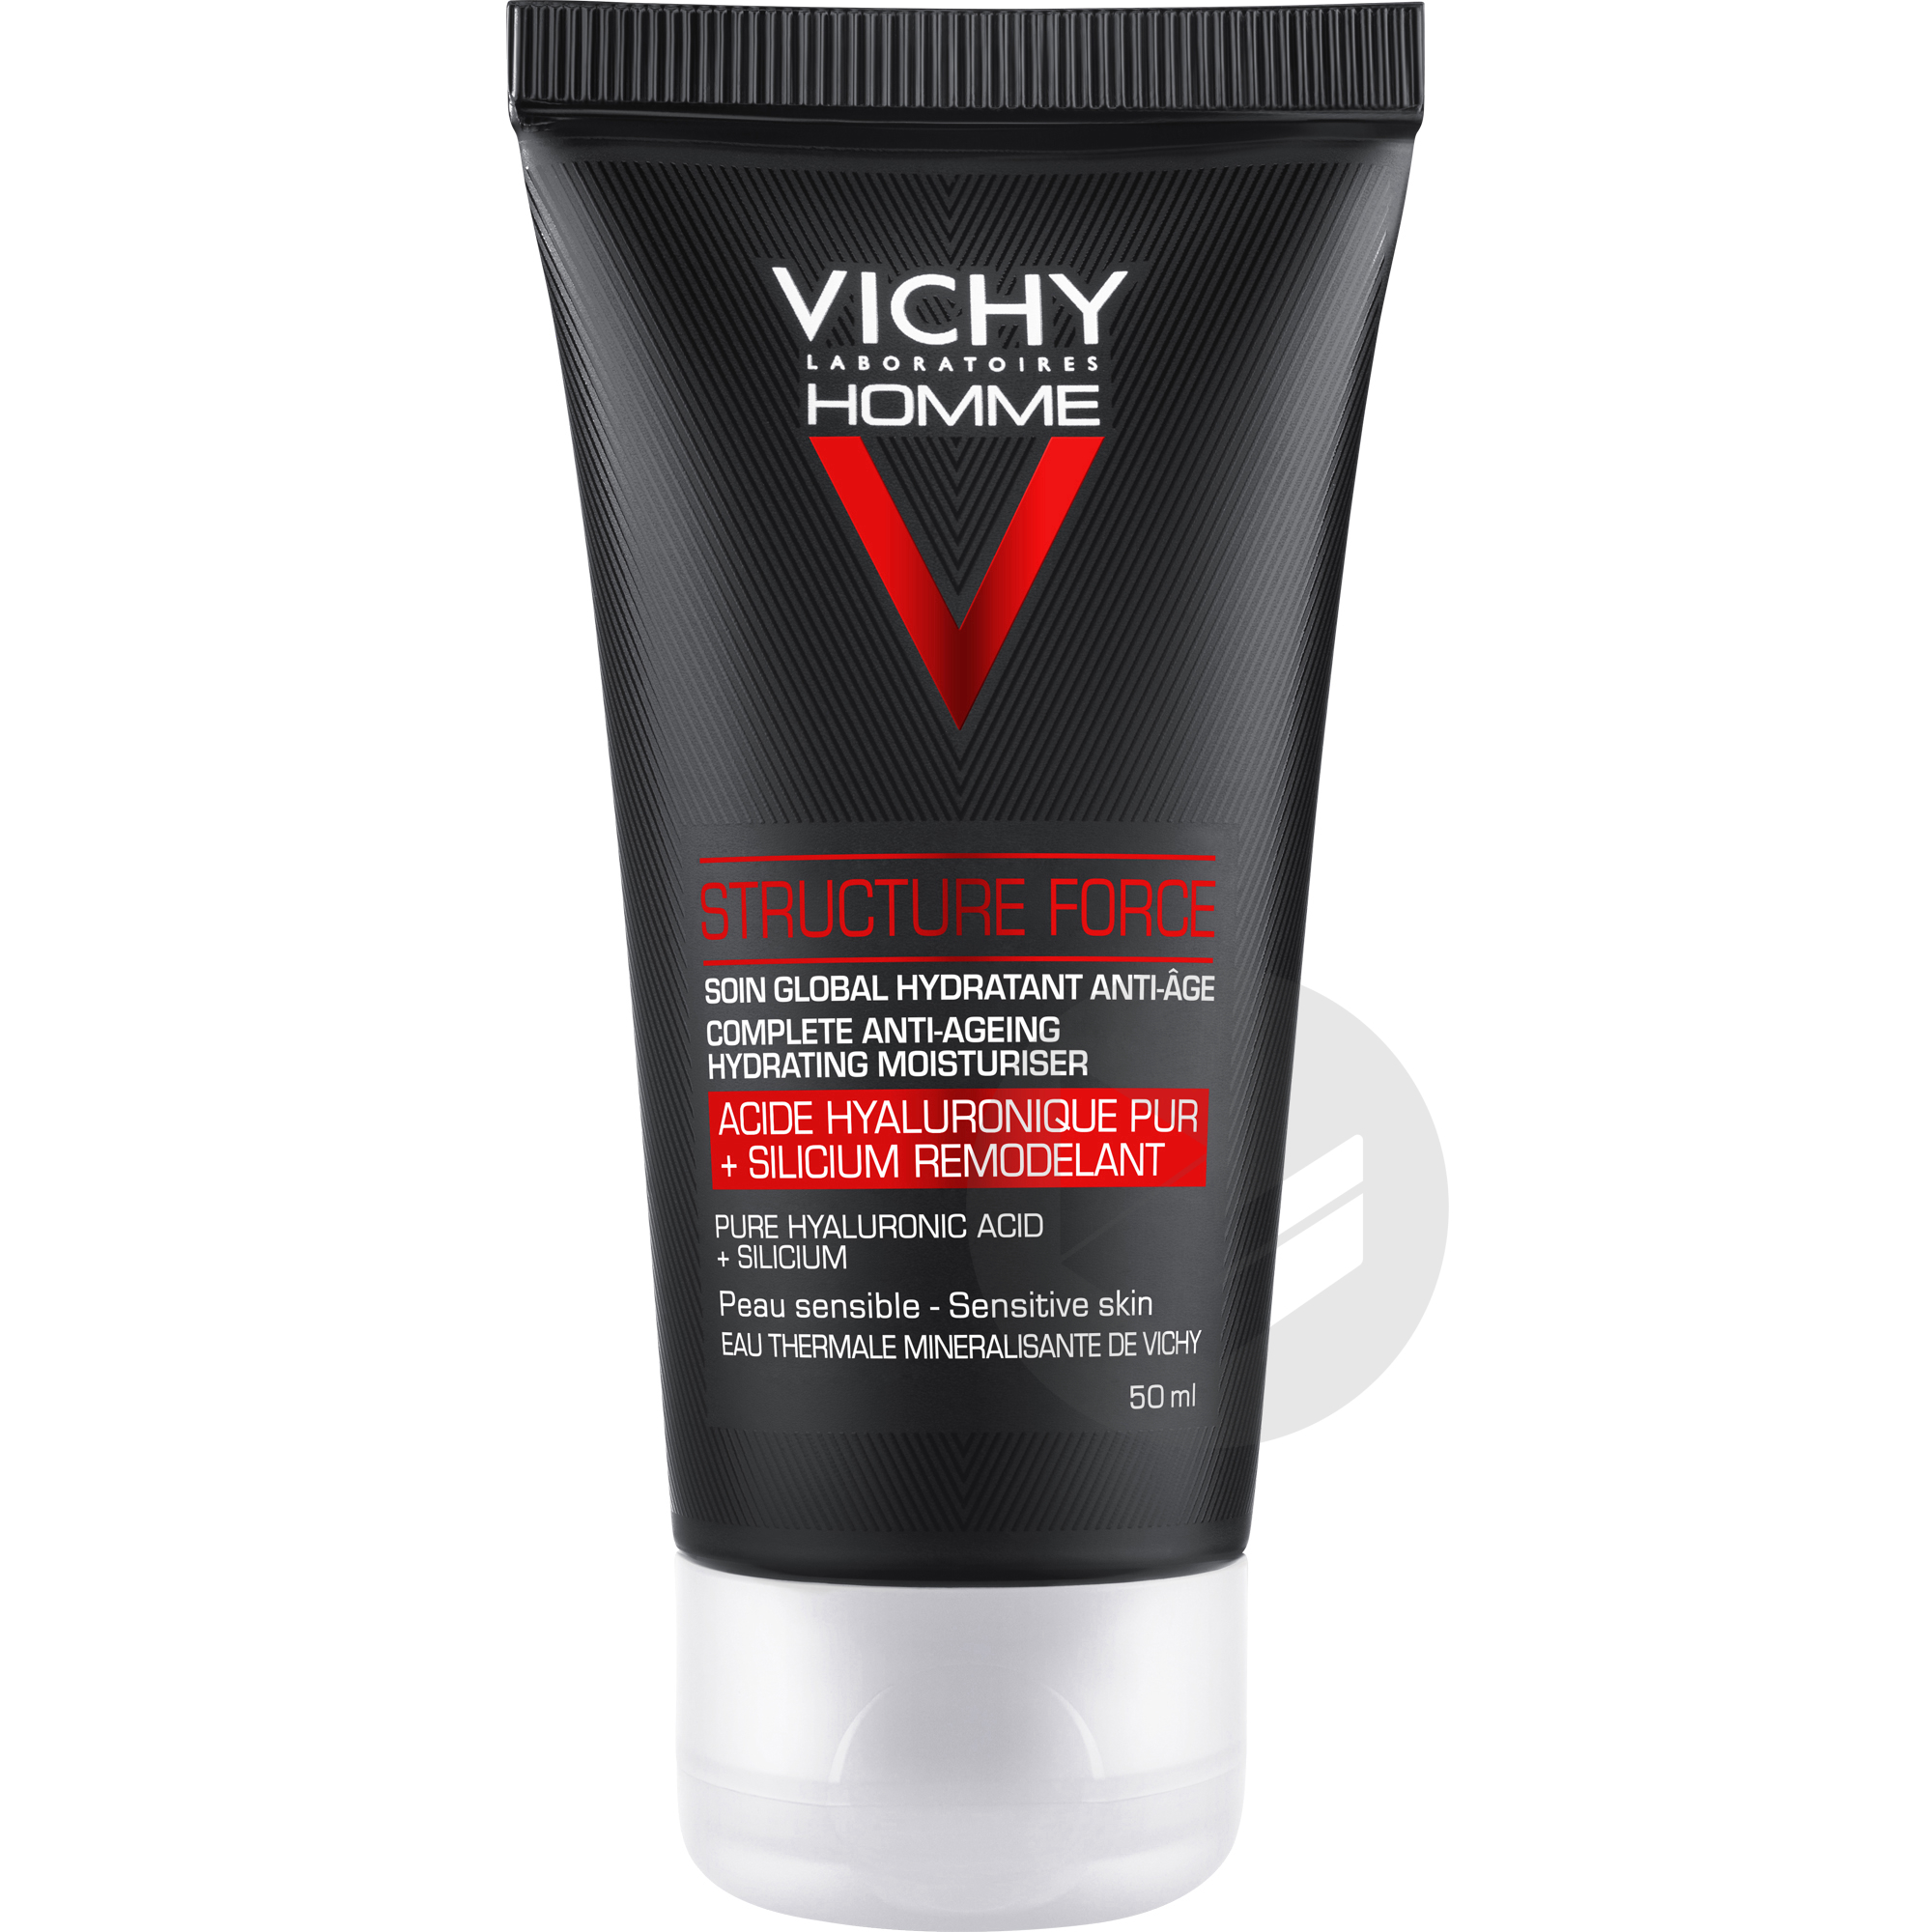 Vichy Homme Structure Force Soin global hydratant anti-âge